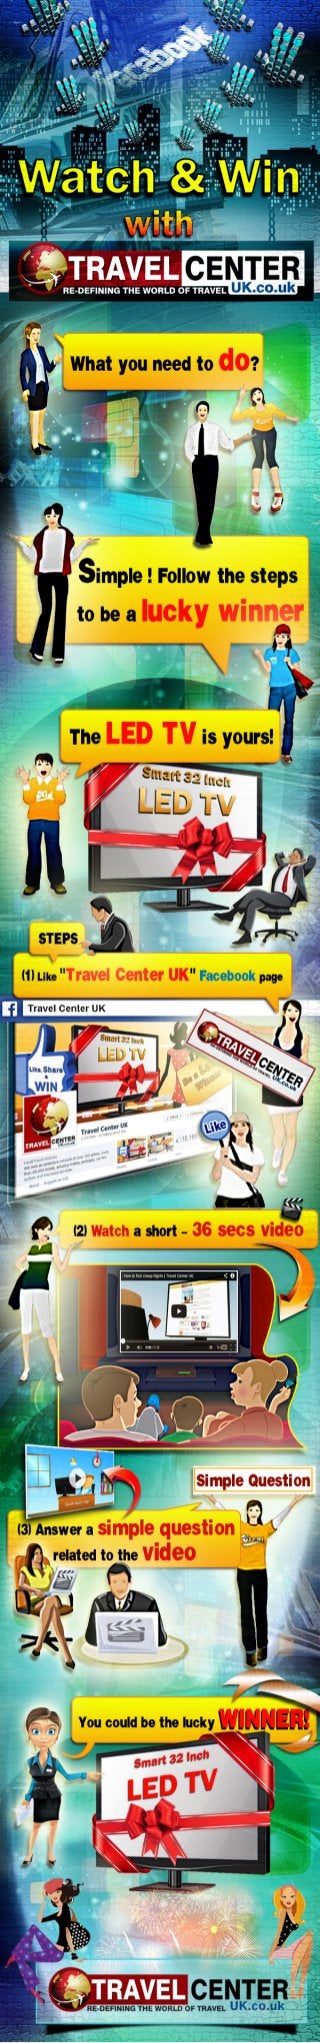 STAND A CHANCE TO WIN A STYLISH LED TV FROM TRAVEL CENTER UK !